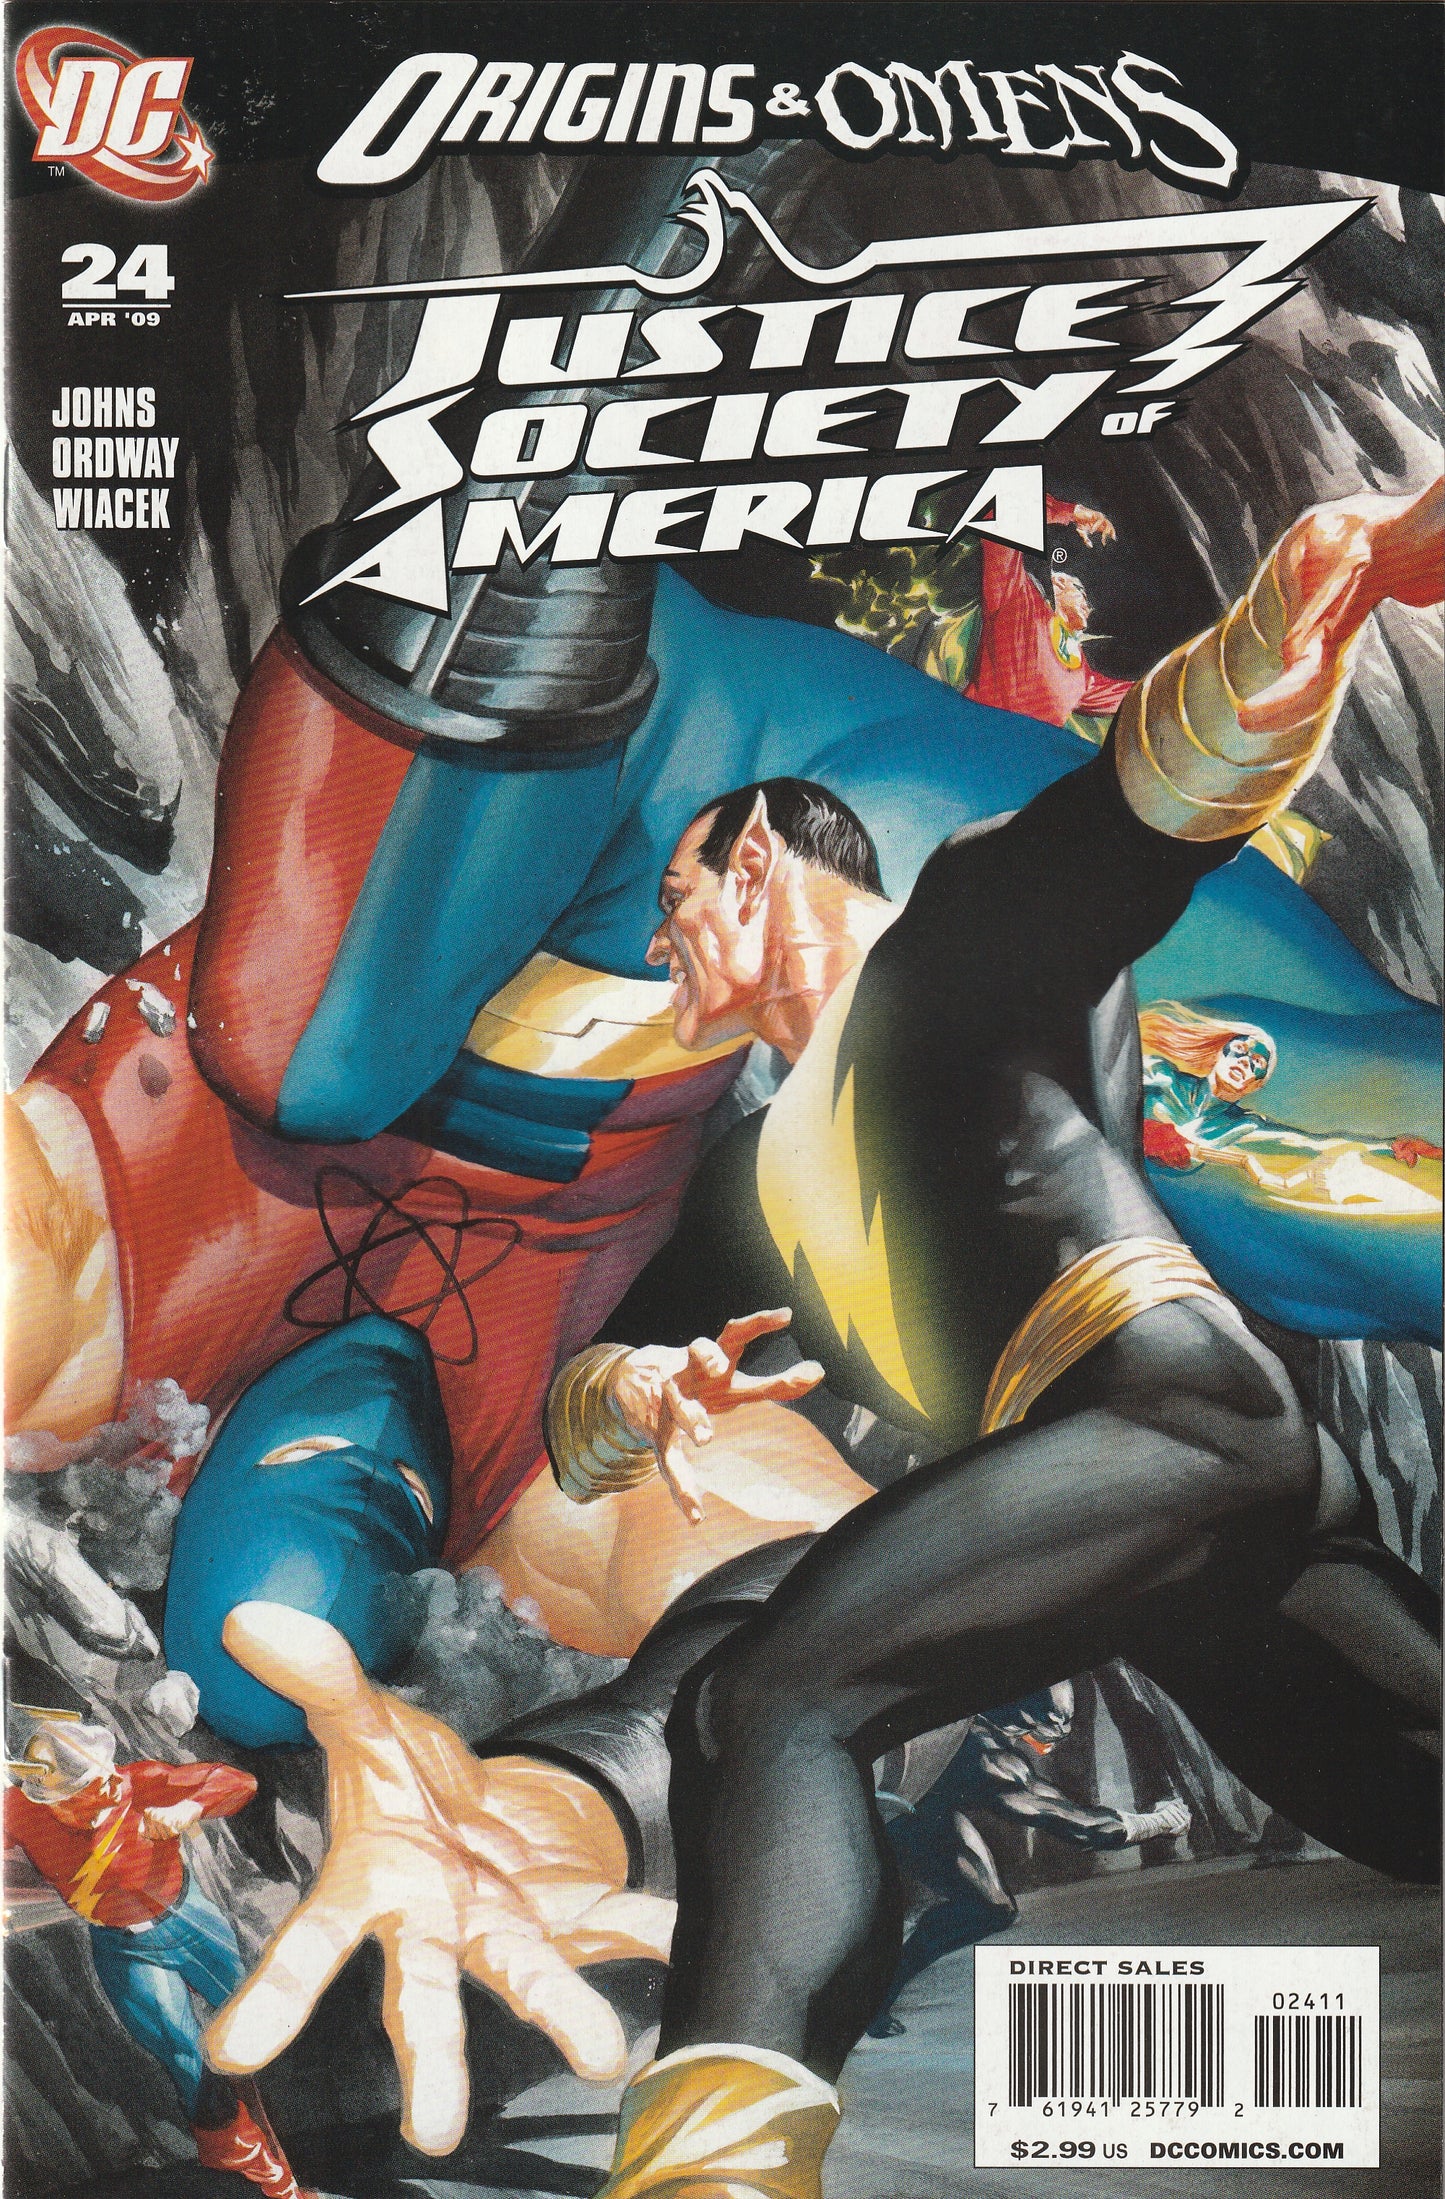 Justice Society of America #24 (2009) - Origins & Omens tie-in, Alex Ross cover